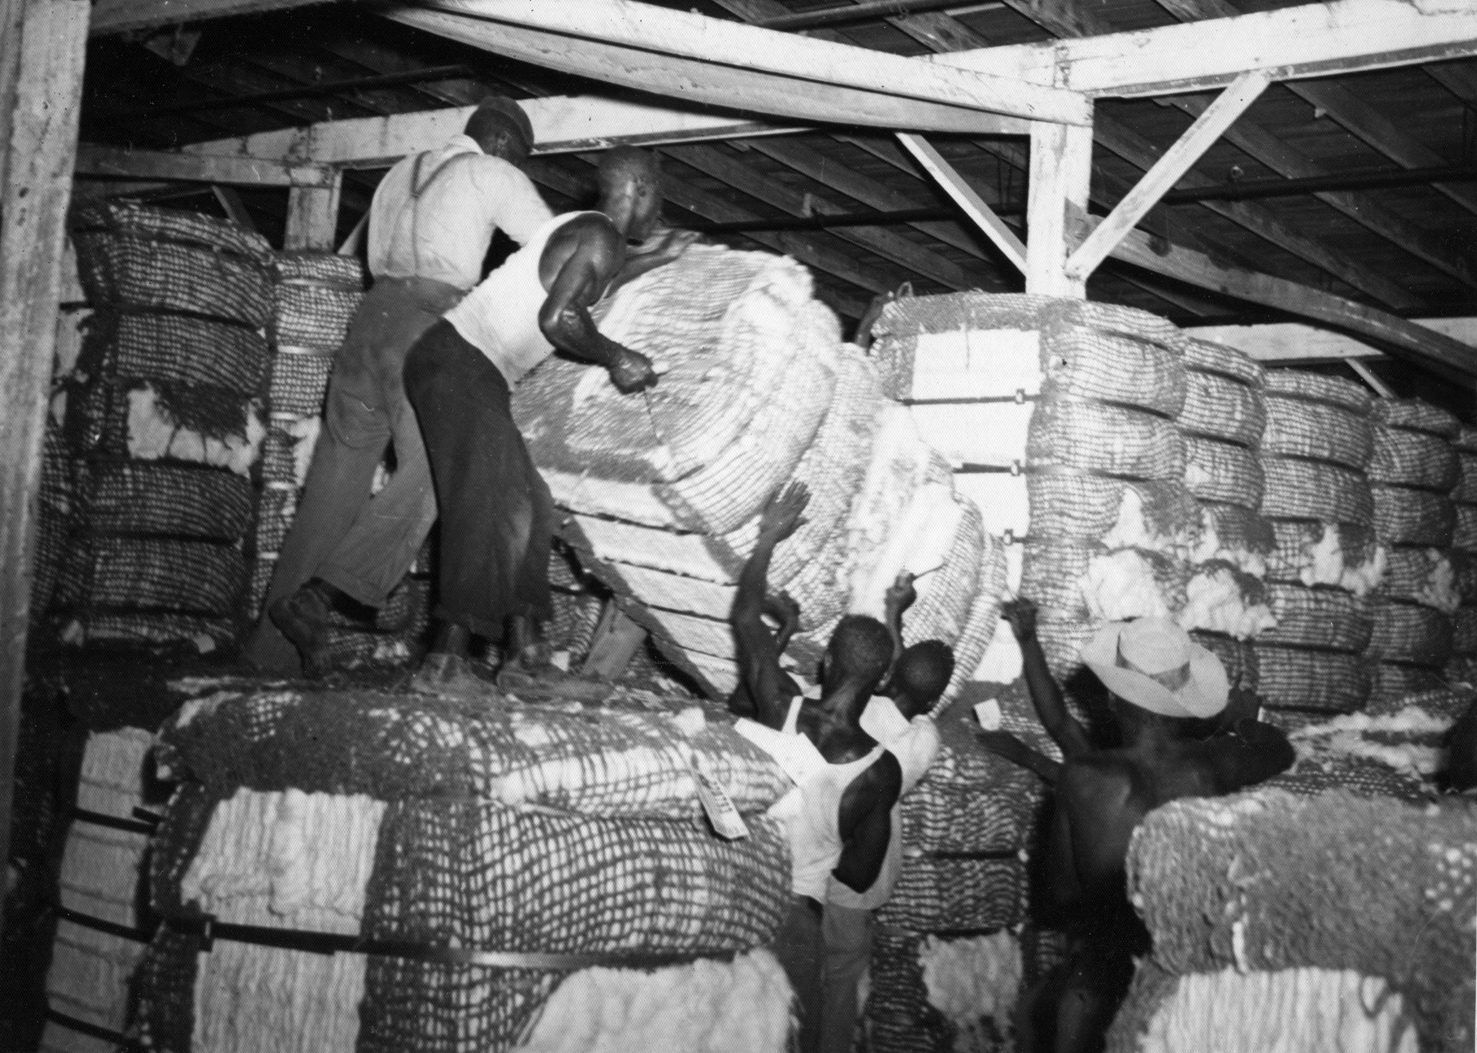 Loading cotton at compress 1940s